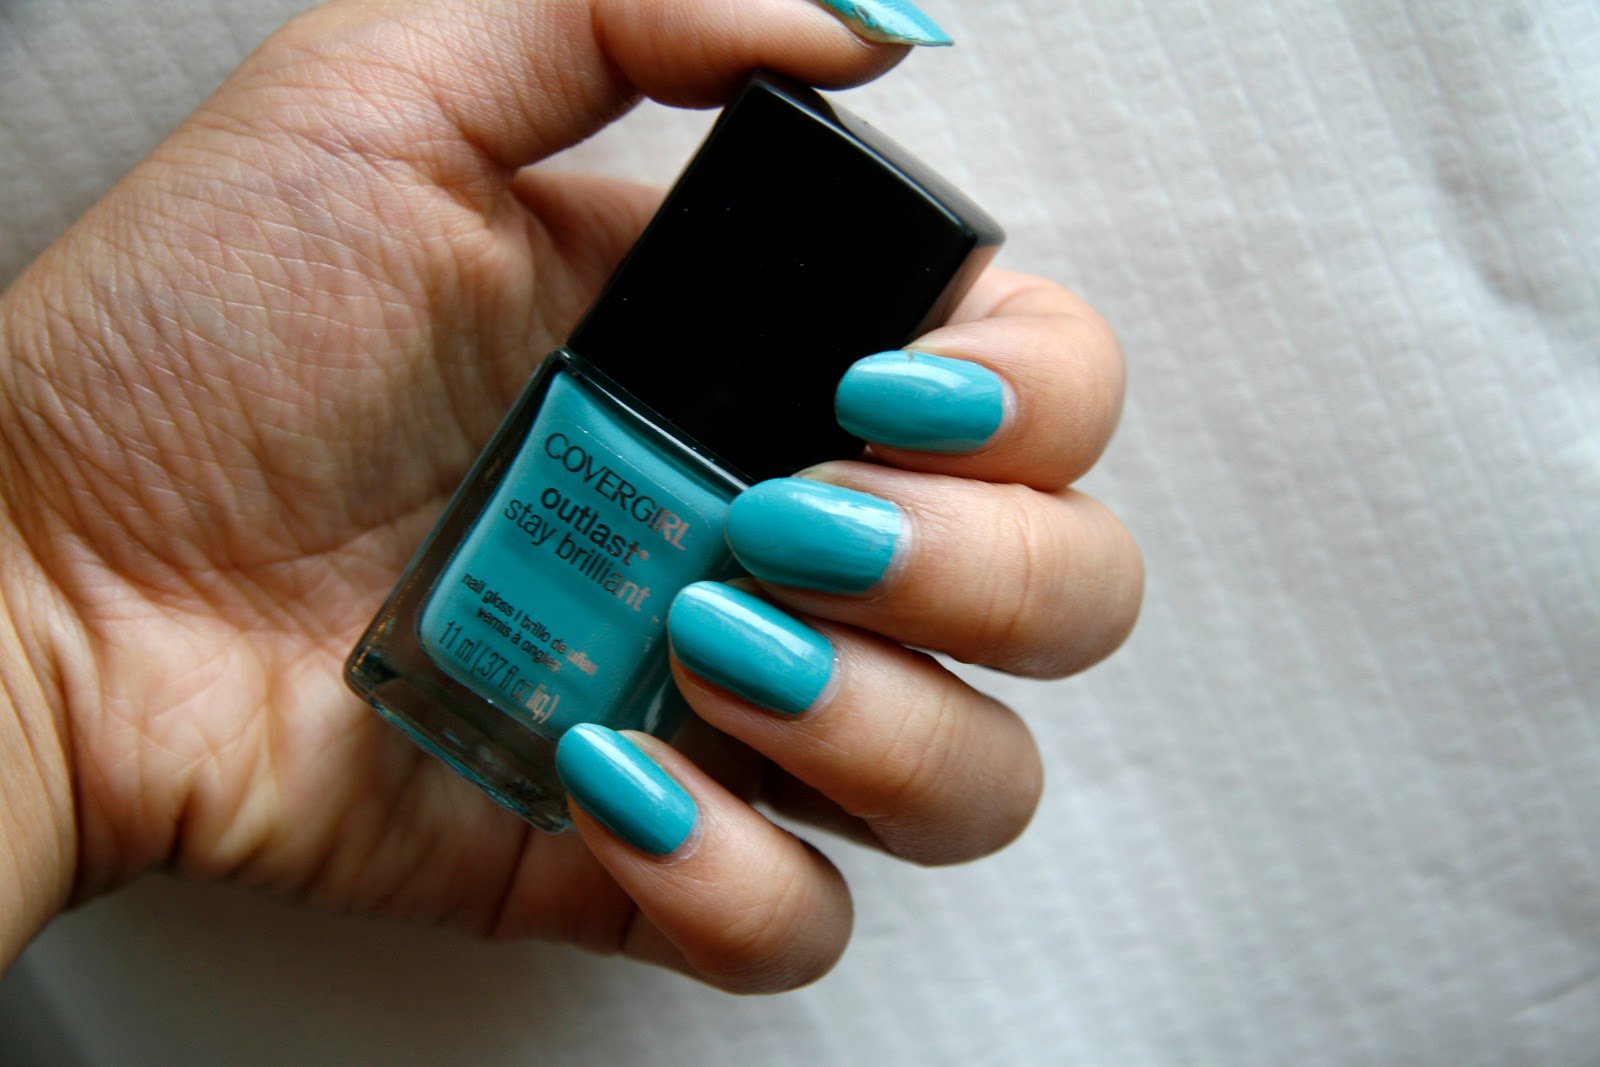 9. Covergirl Outlast Stay Brilliant Nail Gloss in "Sunkissed" - wide 6